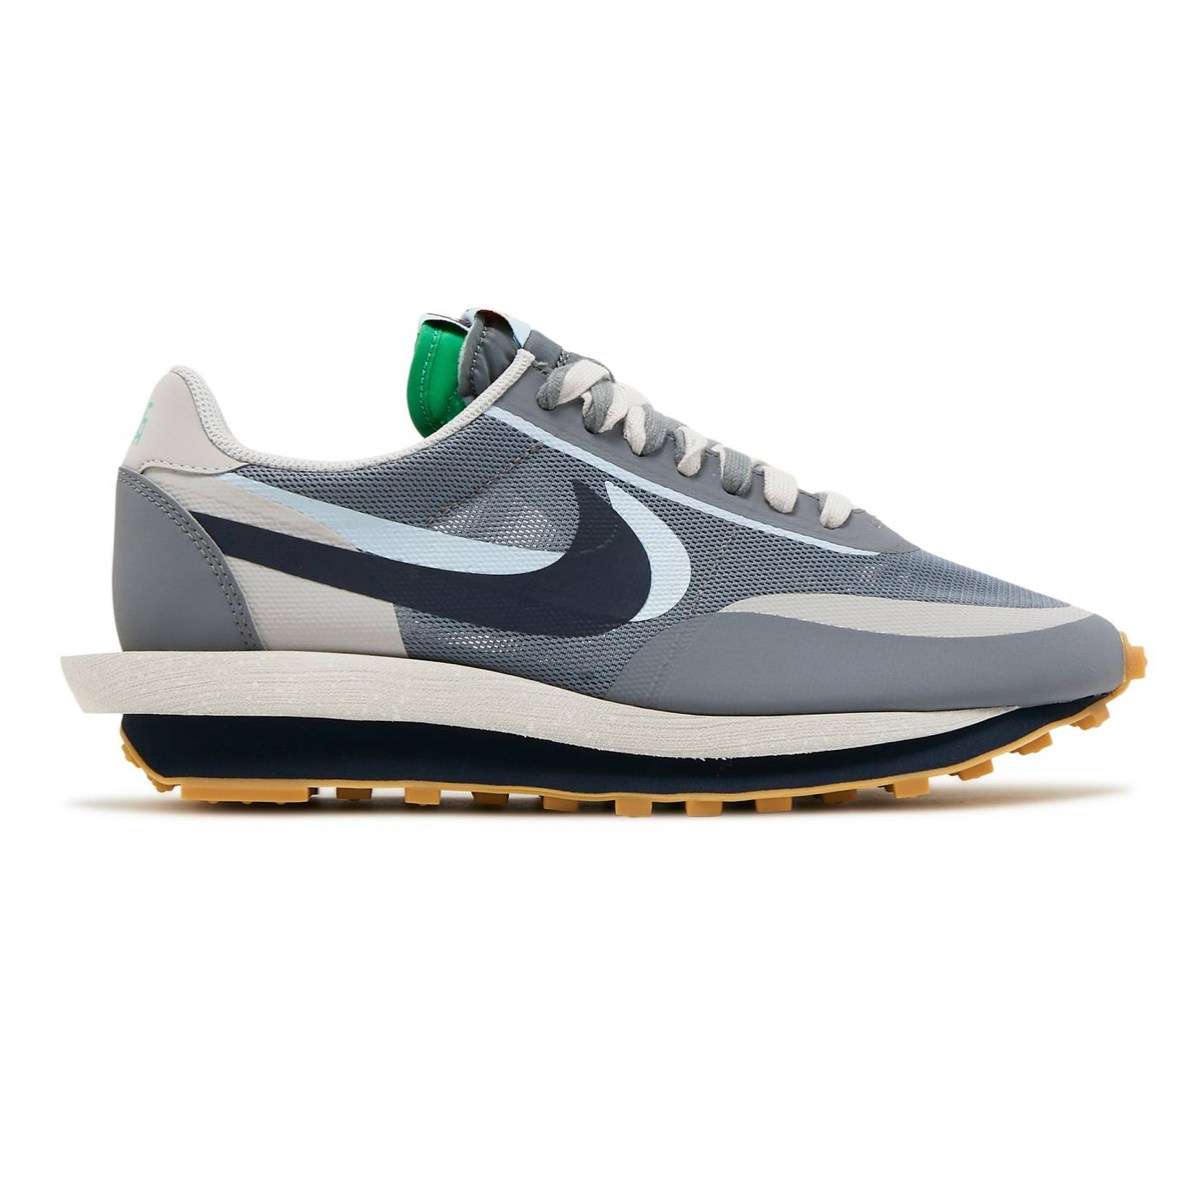 Nike LD Waffle Sacai CLOT Kiss of Death 2 Cool Grey by Nike from £125.00